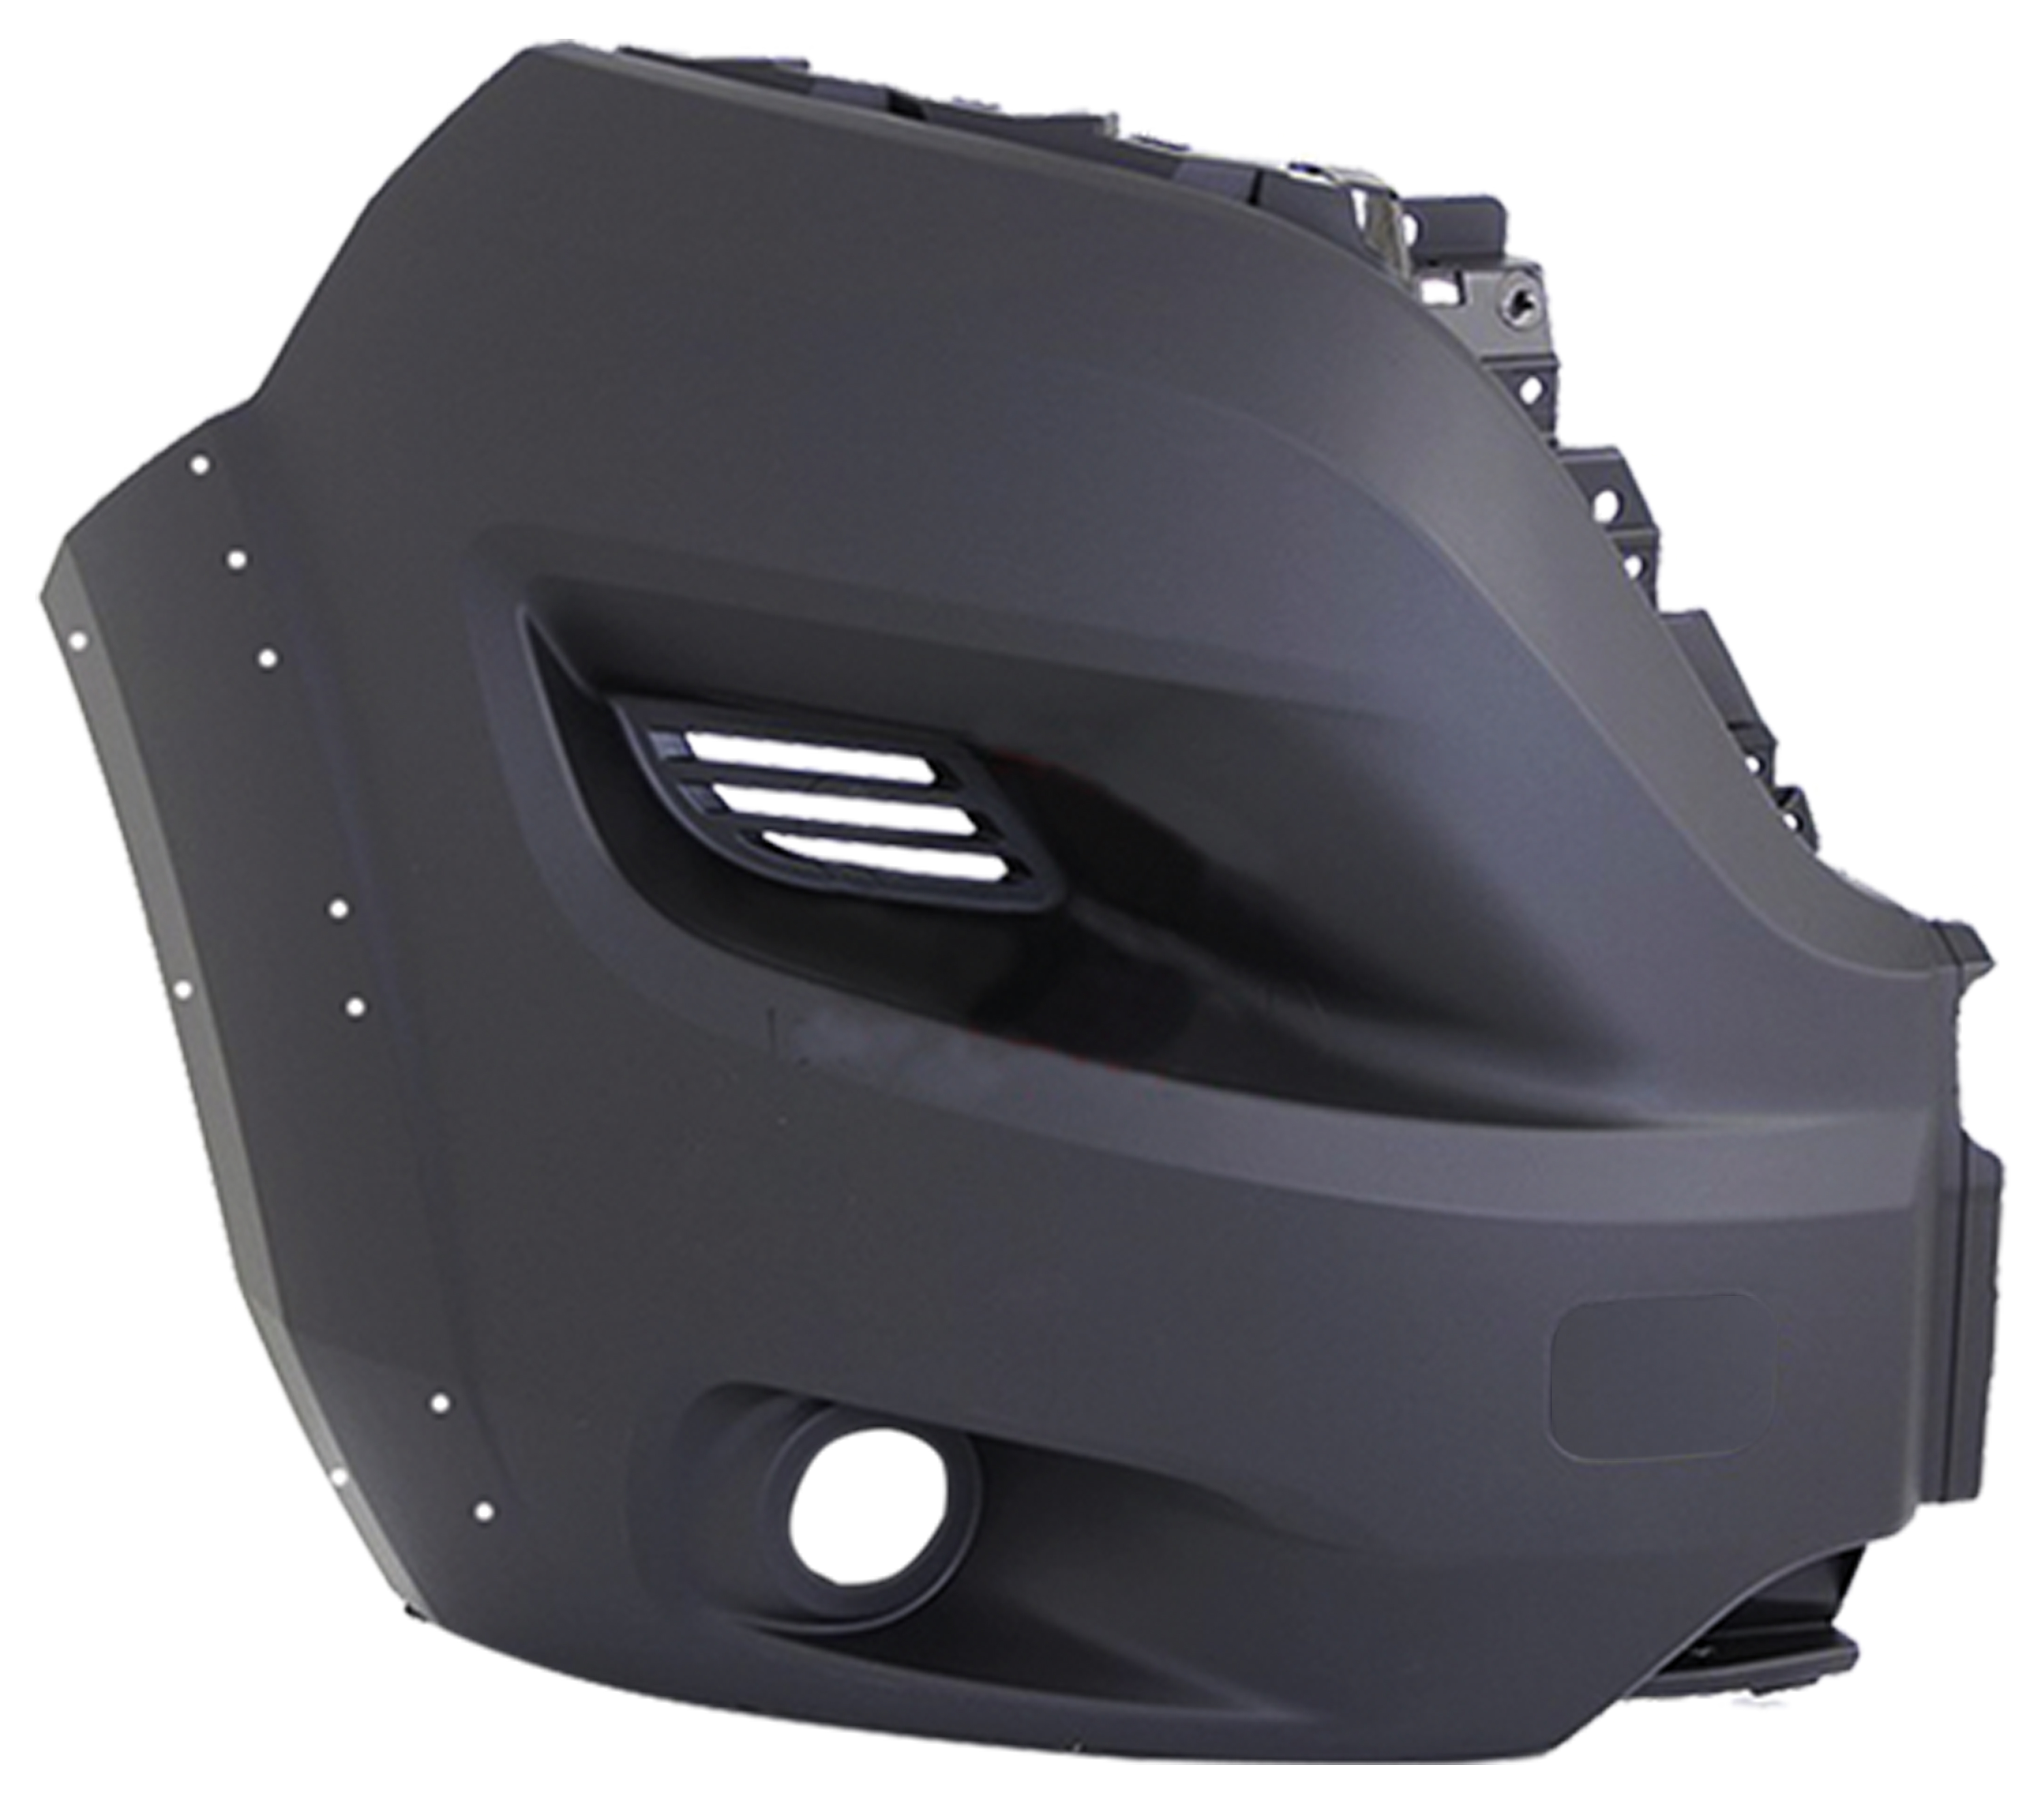 DUCATO 2014- (JUMPER-RELAY-BOXER) FRONT BUMPER, W/ FOG LAMP HOLE, W/ MOULDING HOLES, RIGHT